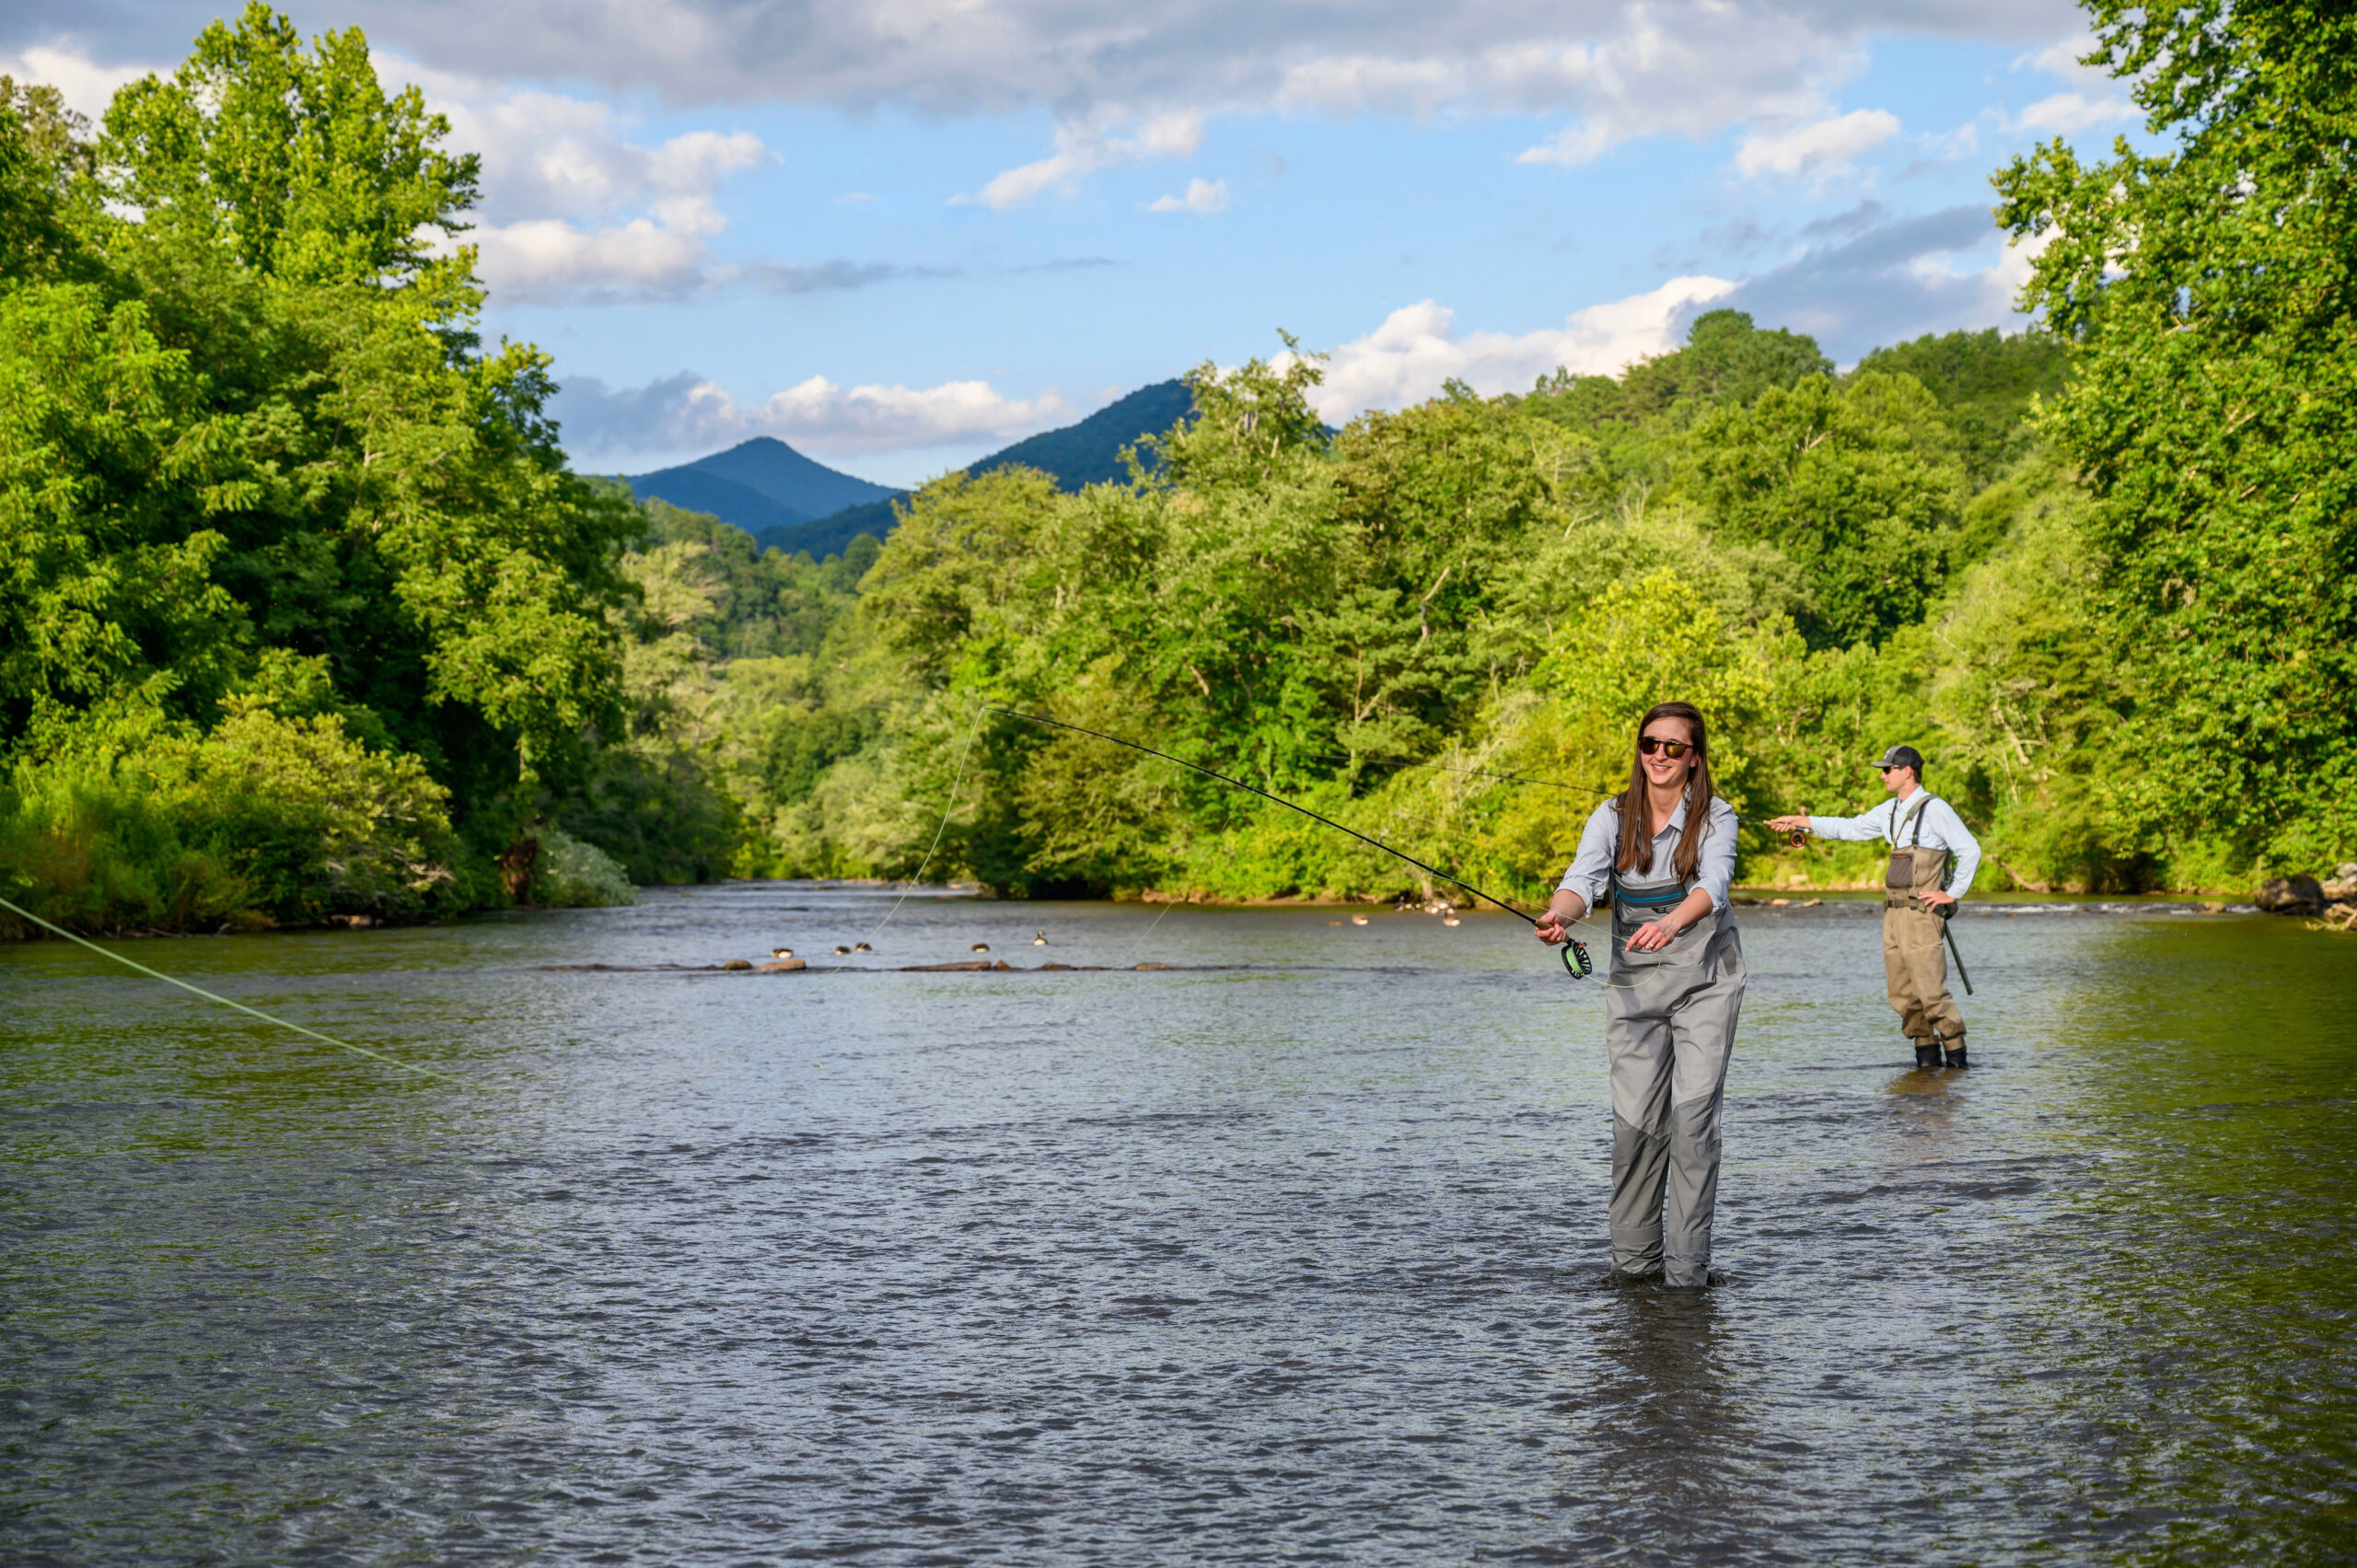 Fly fishing on the Tuckasegee River in the Webster area in Jackson County, NC.